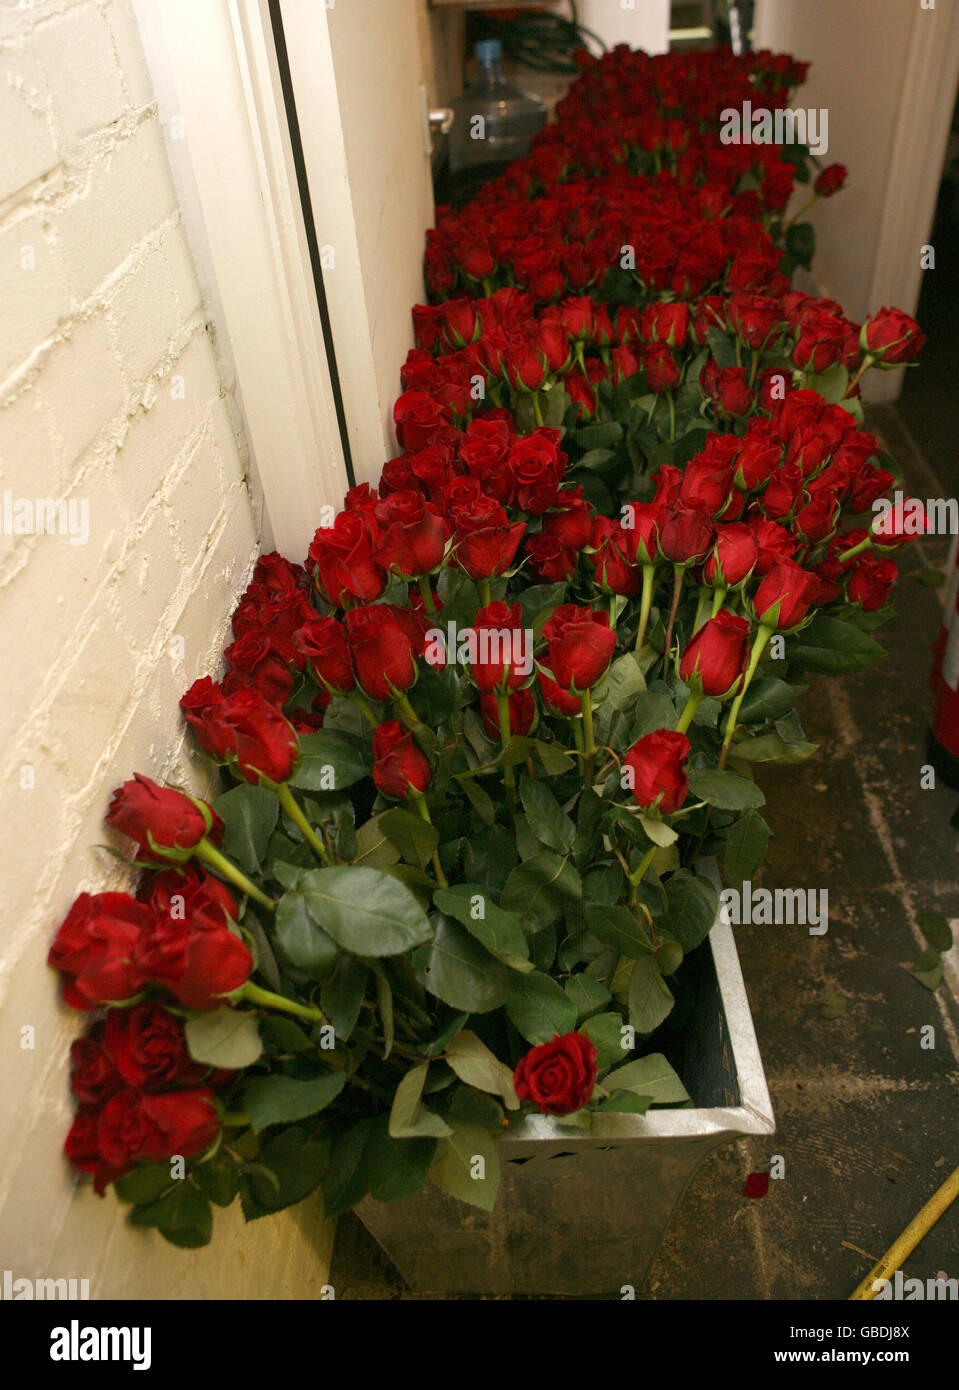 Red roses line an alleyway at Only Roses on Old Brompton Road, London, prepares a bouquet ahead of Valentine's Day. Stock Photo